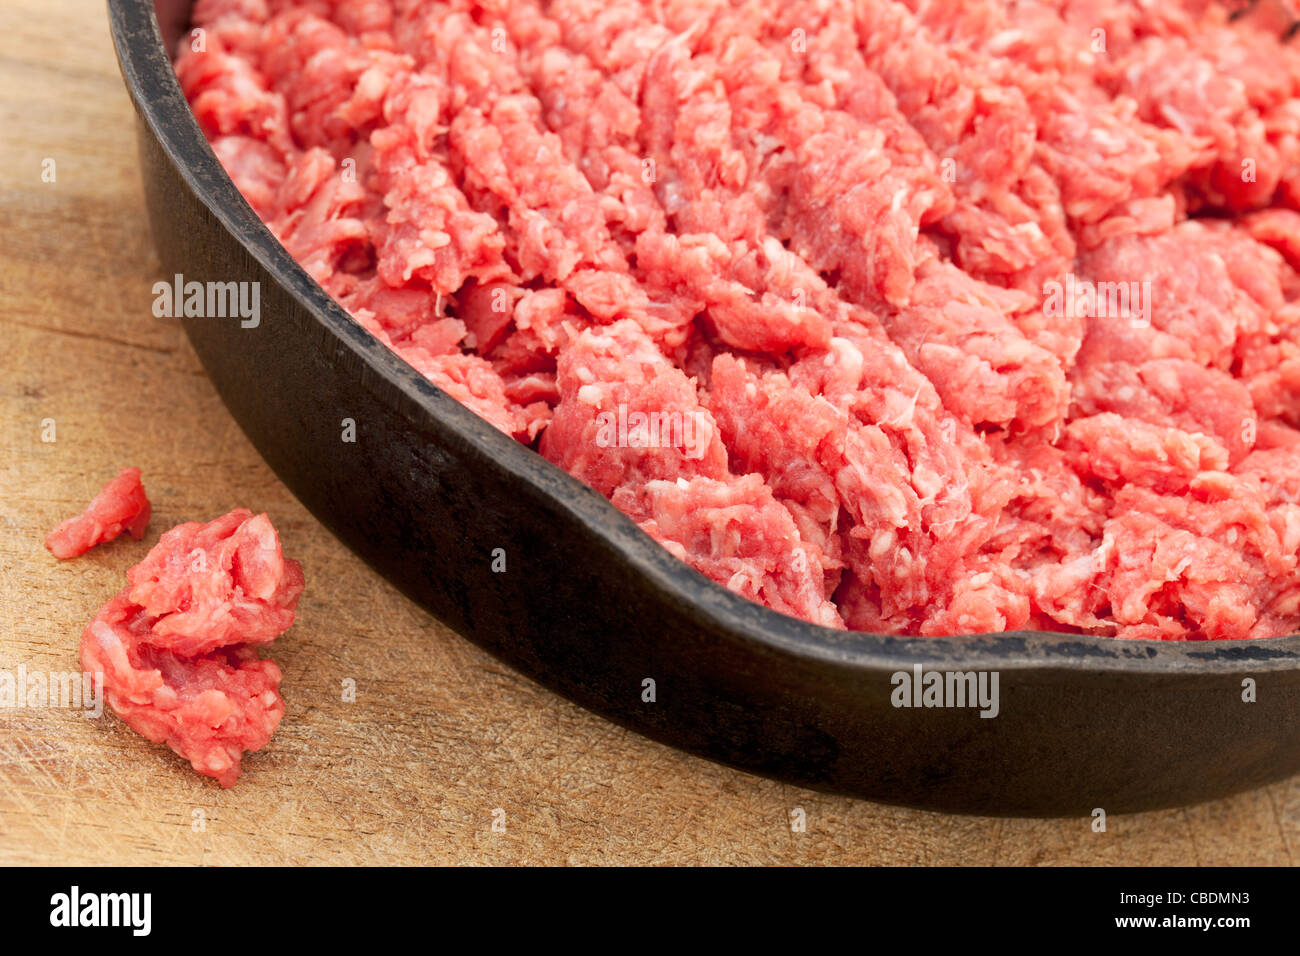 raw ground bison (buffalo) meat on an iron pan against wood surface Stock Photo